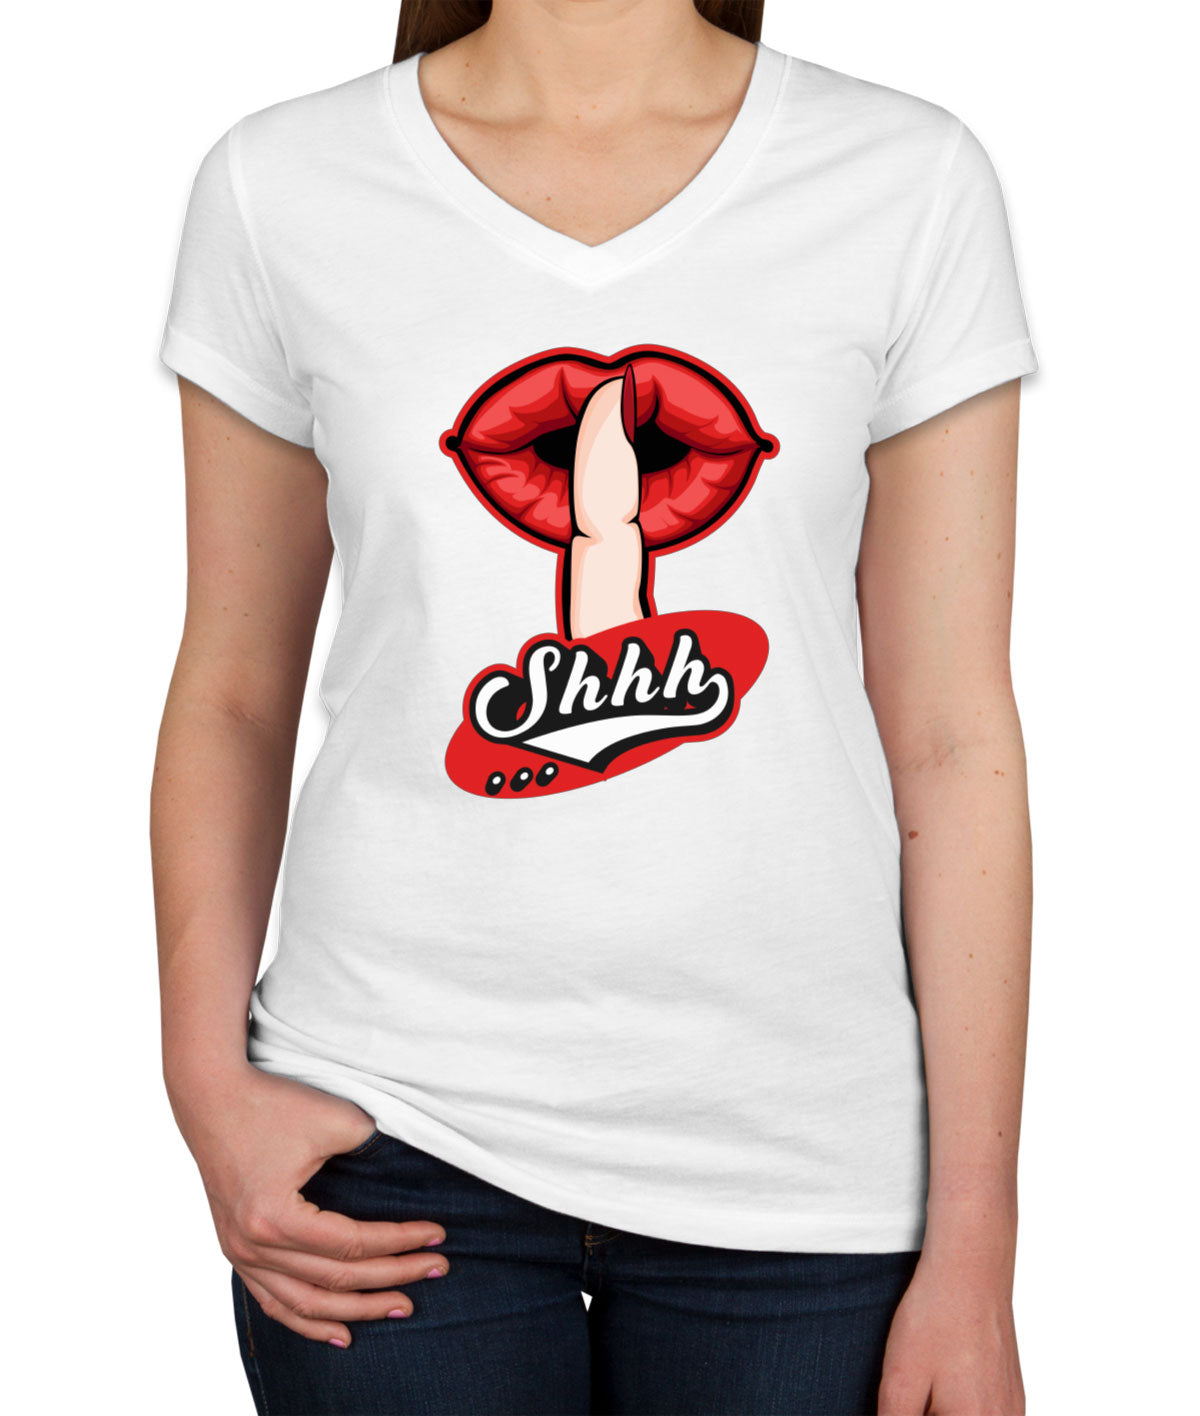 Shhh Silent Gesture With Finger And Red Lips Women's V Neck T-shirt